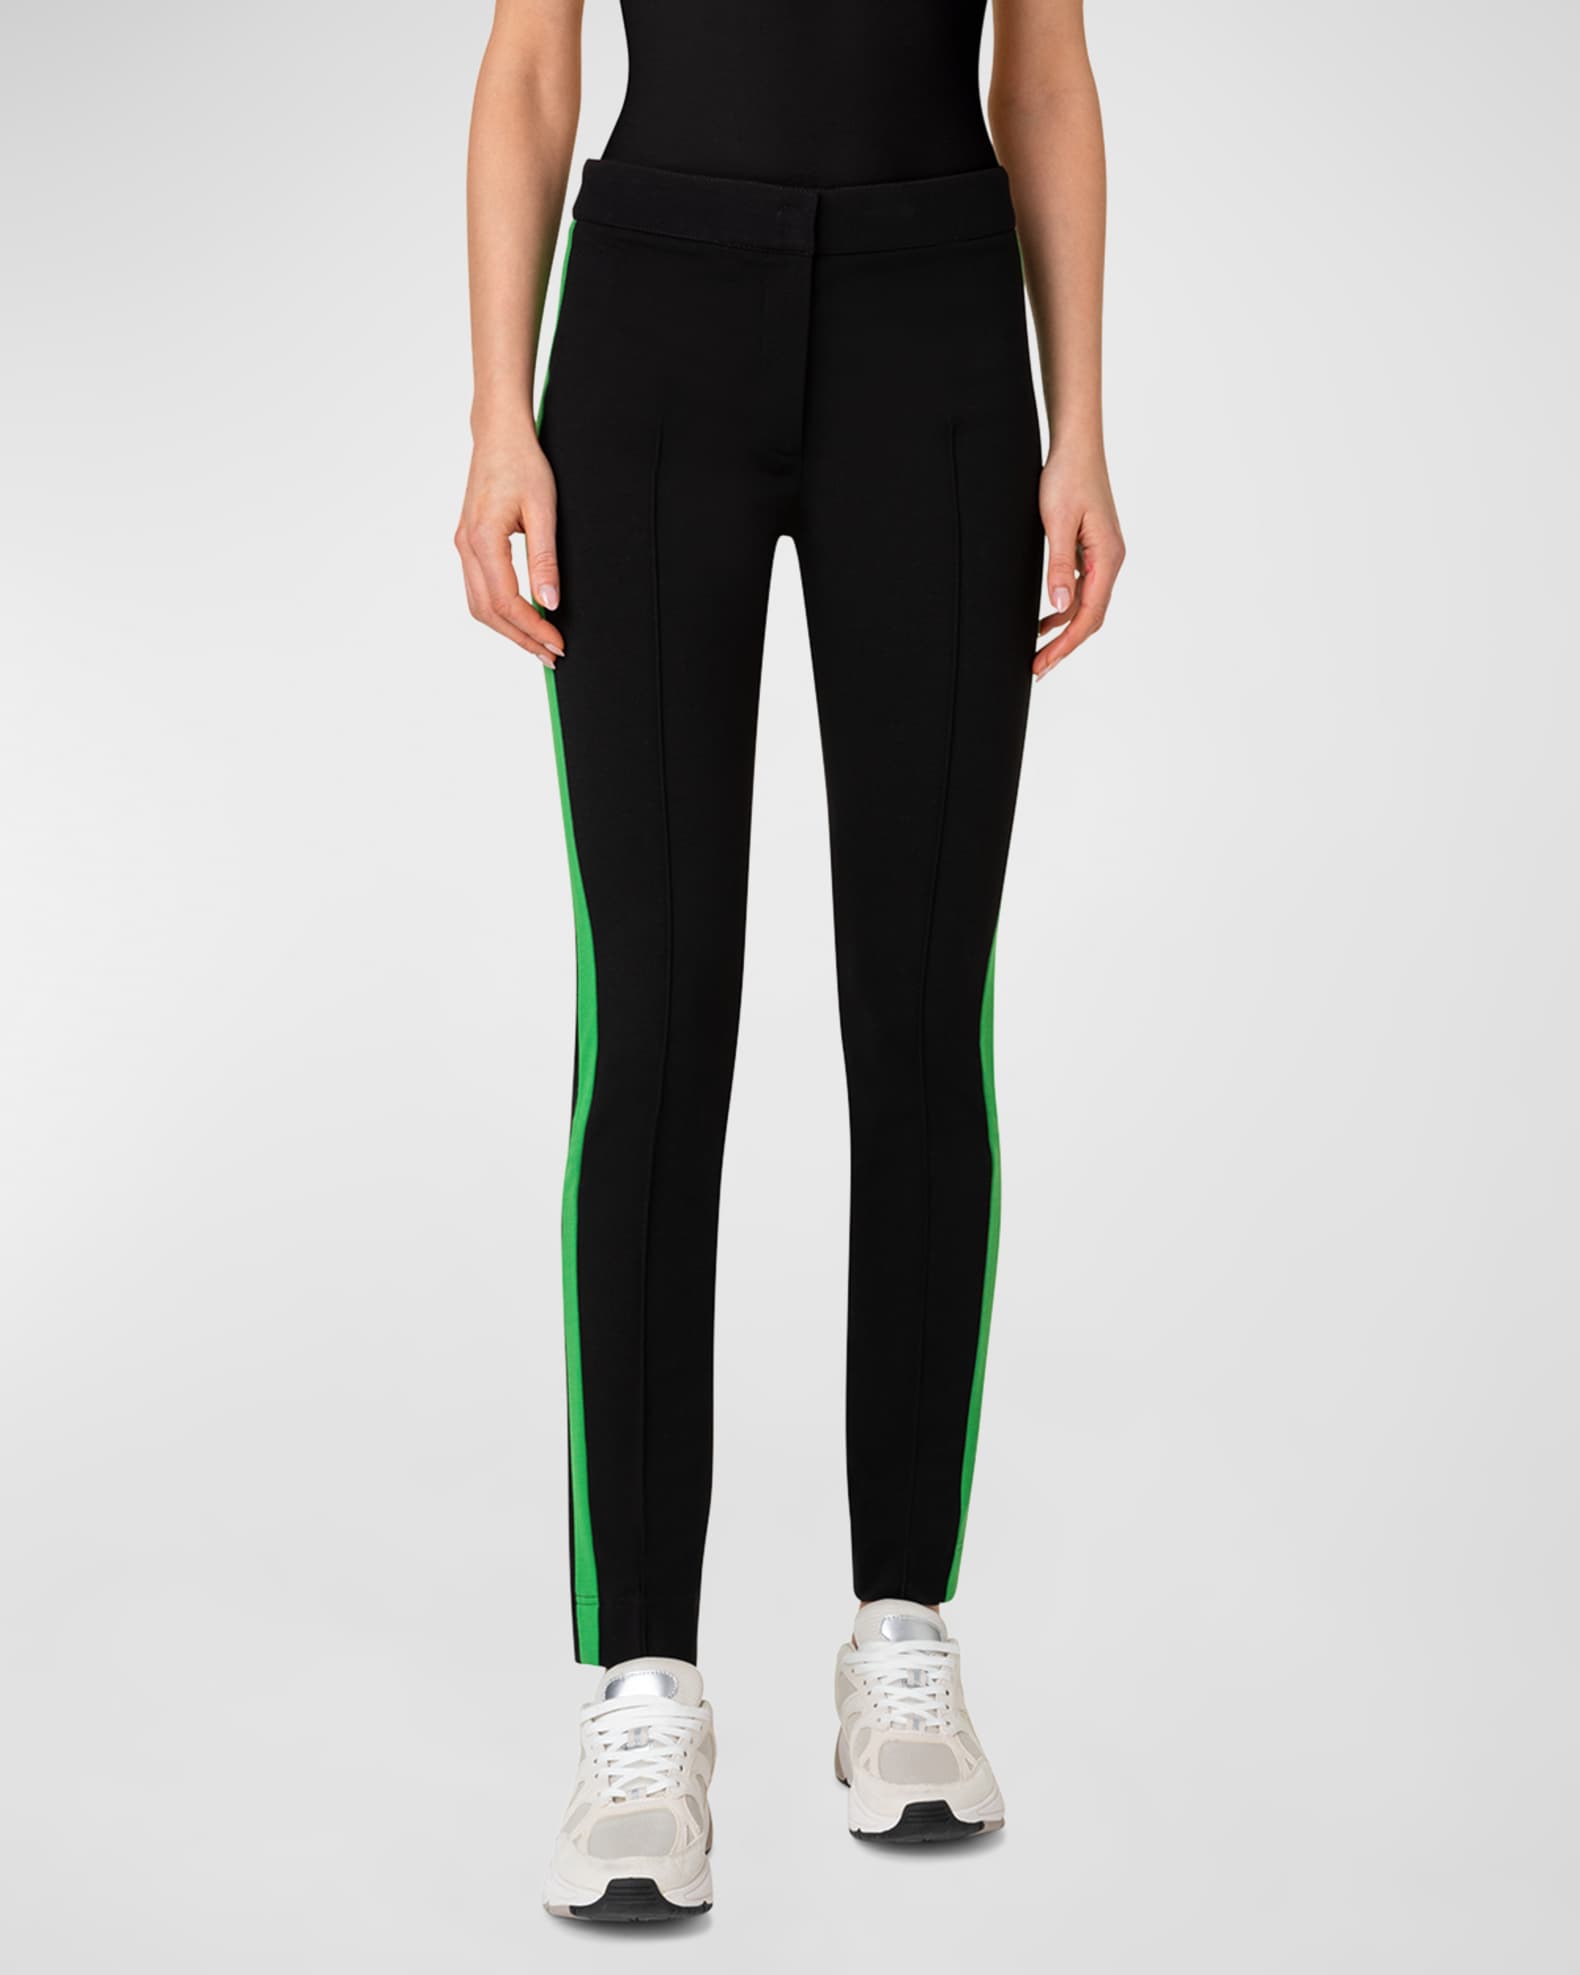 Mara Jersey Pants with Contrast Stripe